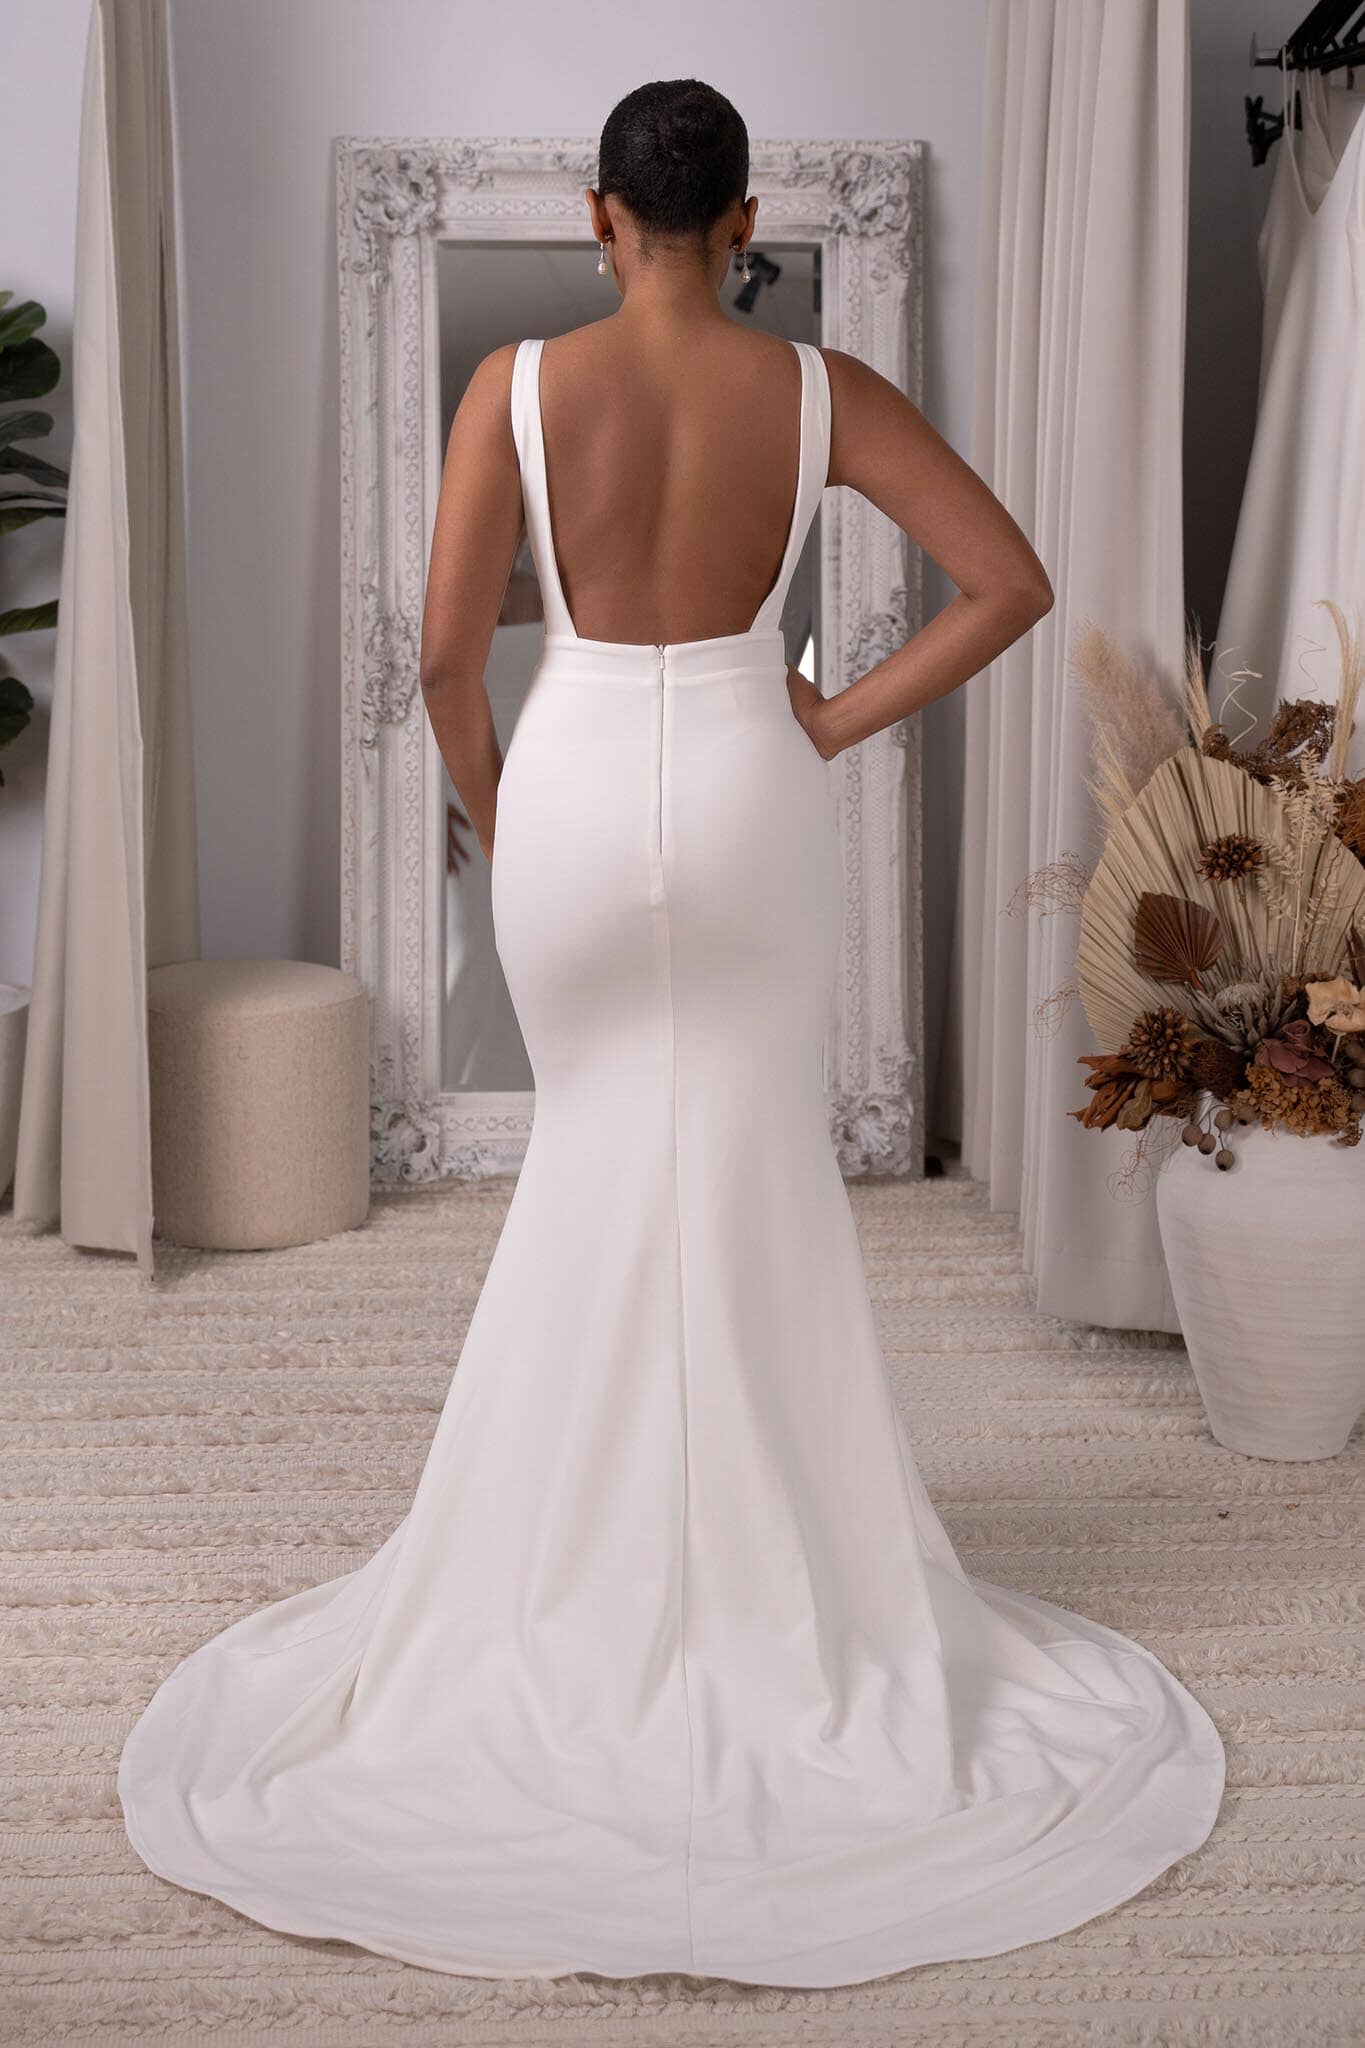 Beautiful Back Wedding Dresses Which One Is Right For You?